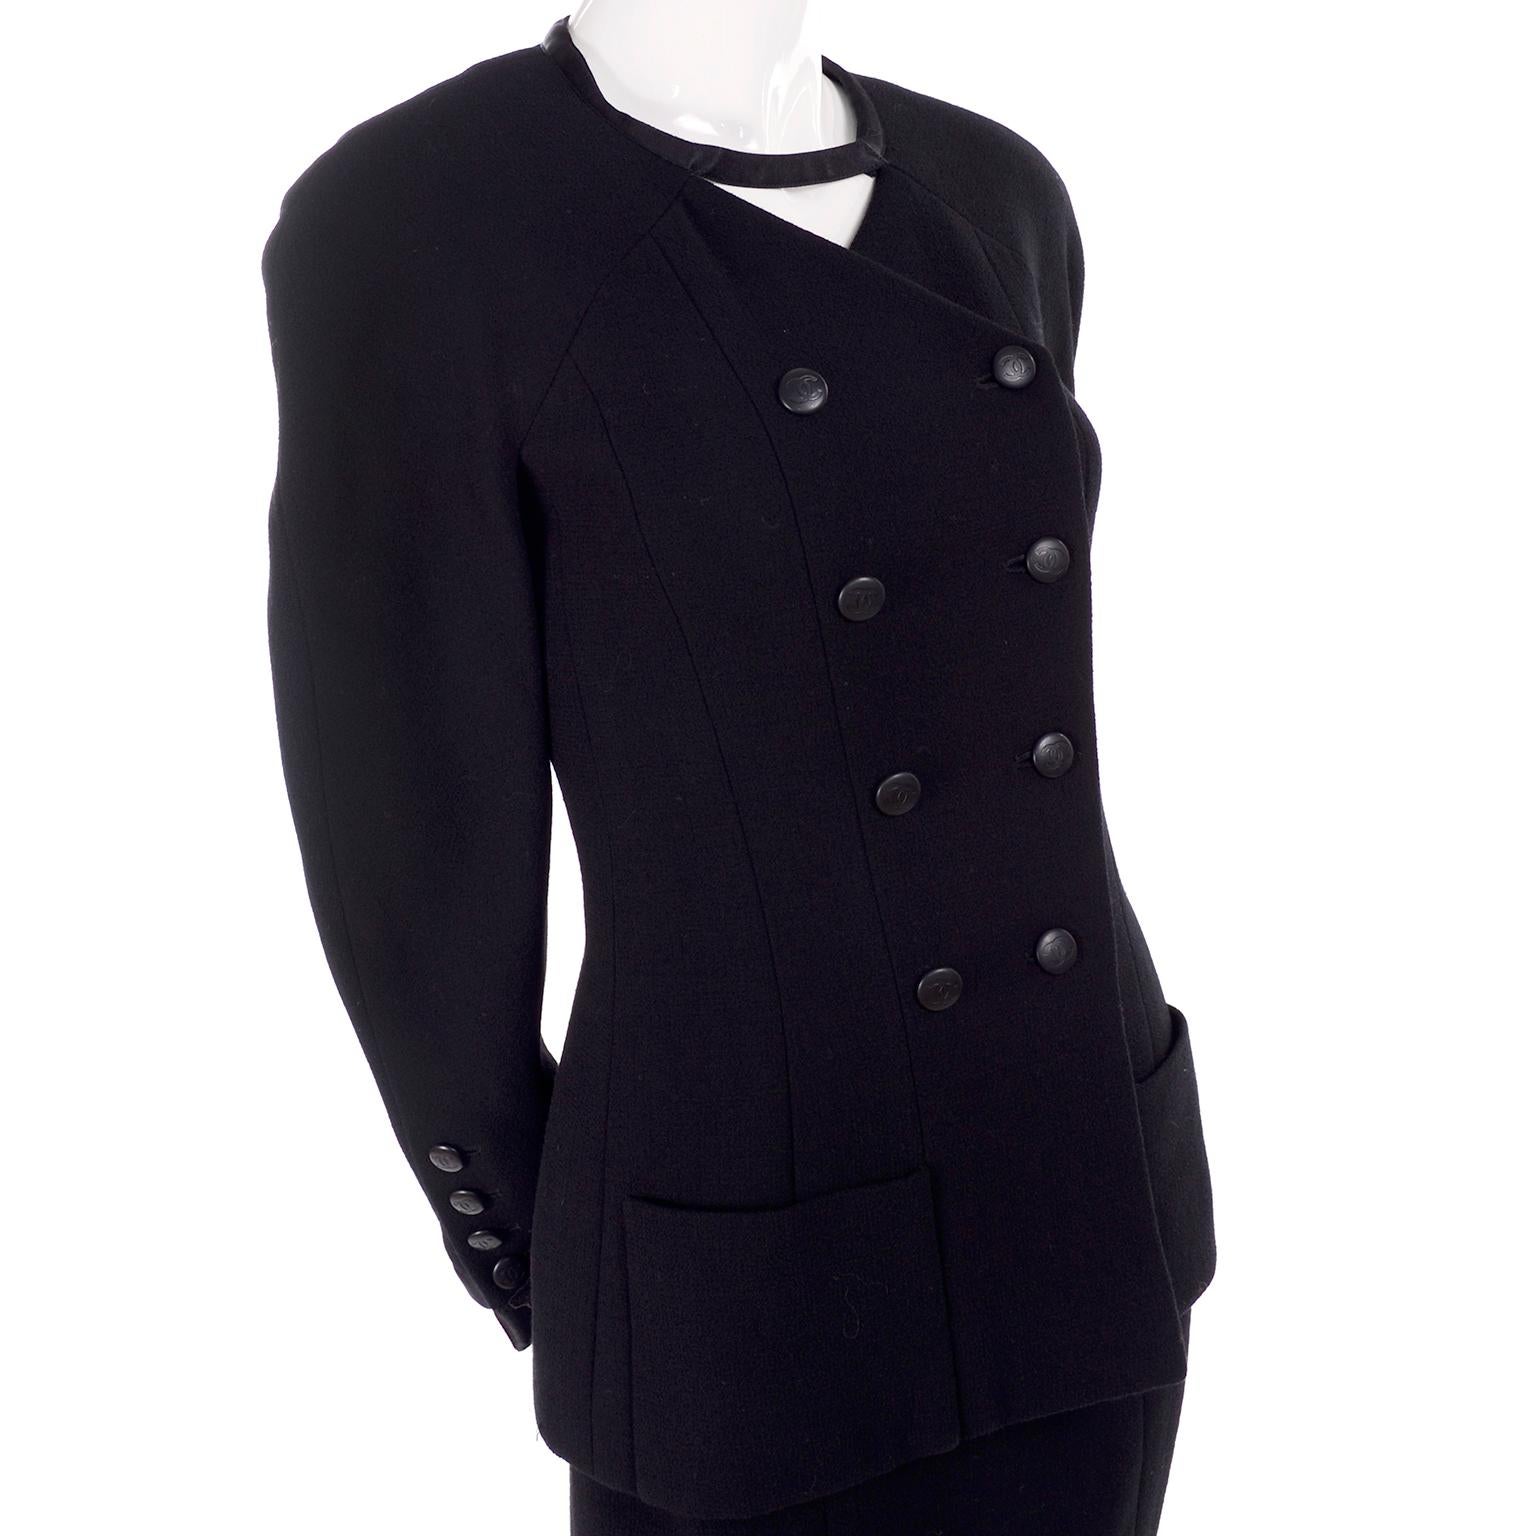 This is a wonderful vintage black wool Chanel suit designed by Karl Lagerfeld for the 1996 Cruise / Resort collection. The outfit includes a skirt and a double breasted jacket with an interesting connecting piece of fabric that crosses over at the